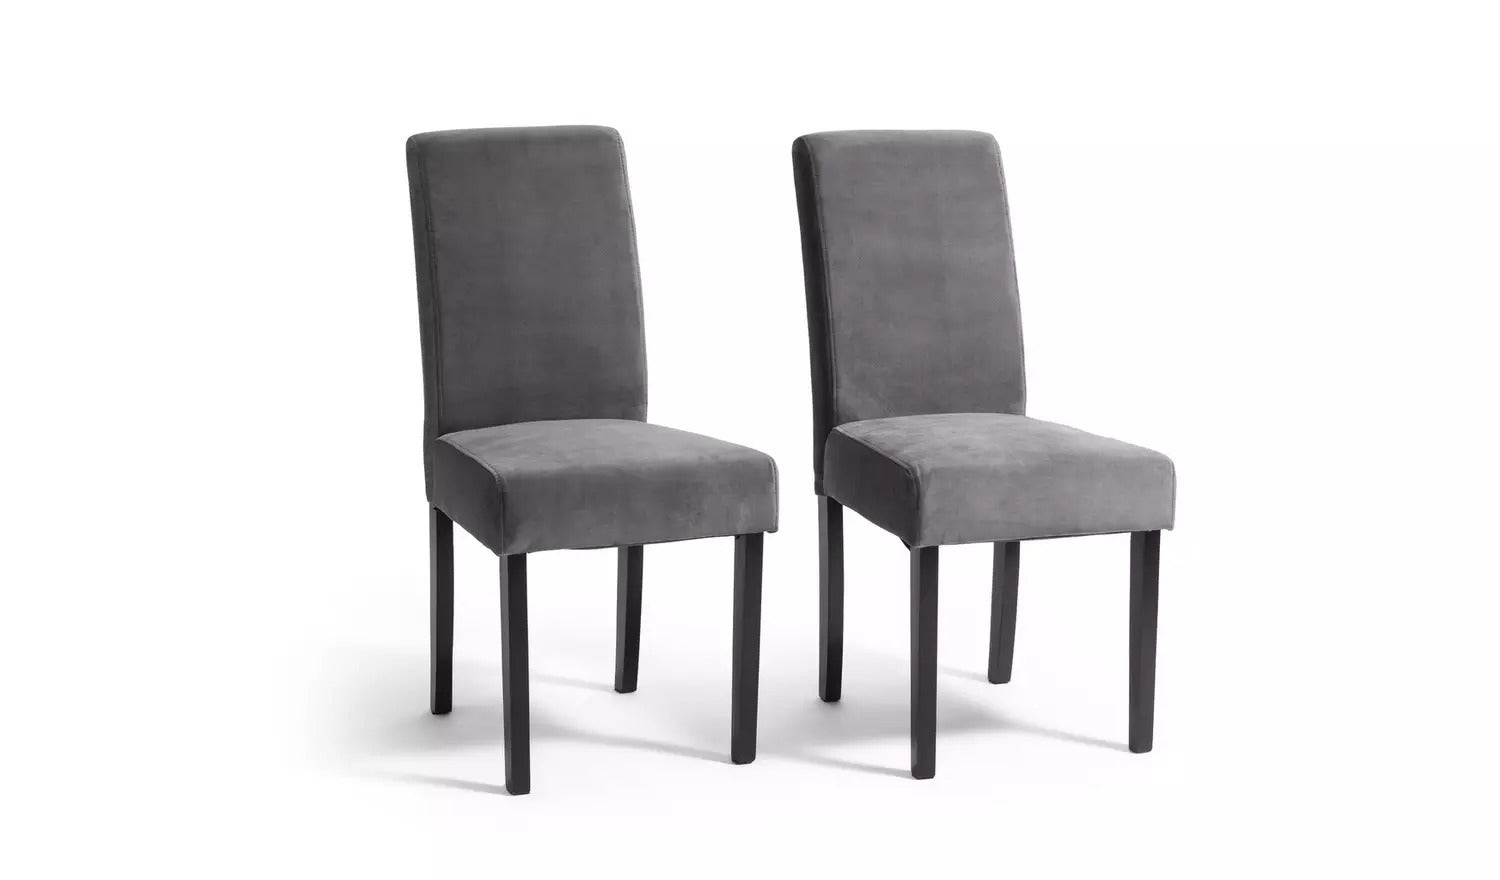 Home Pair of Midback Velvet Dining Chairs - Grey